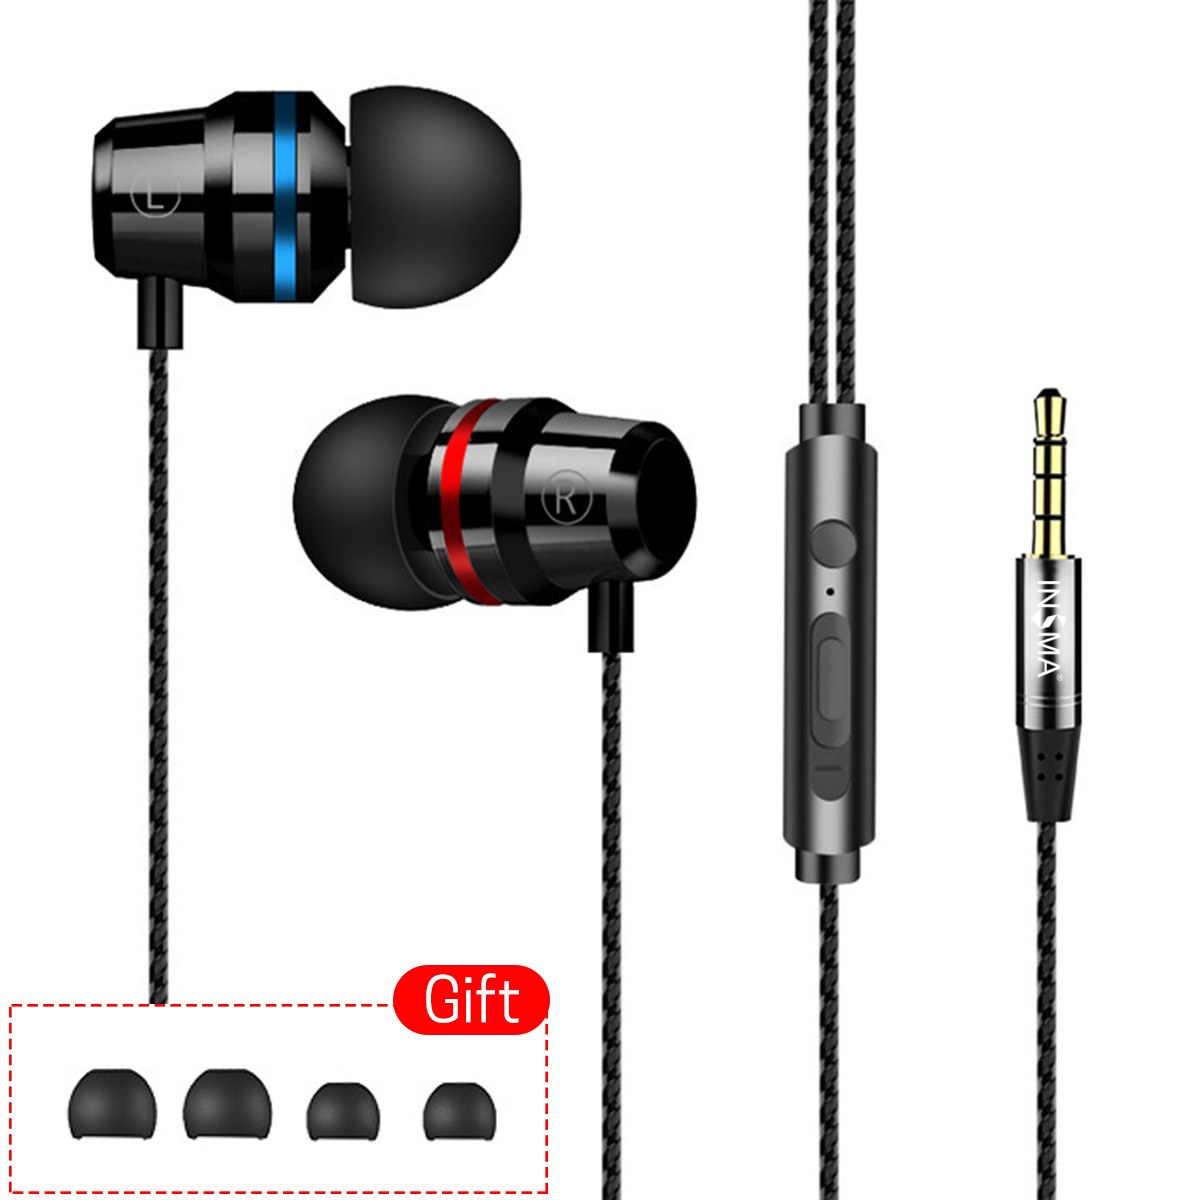 

INSMA G86 Metal Bass In-ear Earphone 4D Stereo Sound Line Control Headphone With Mic for Mobile Phones